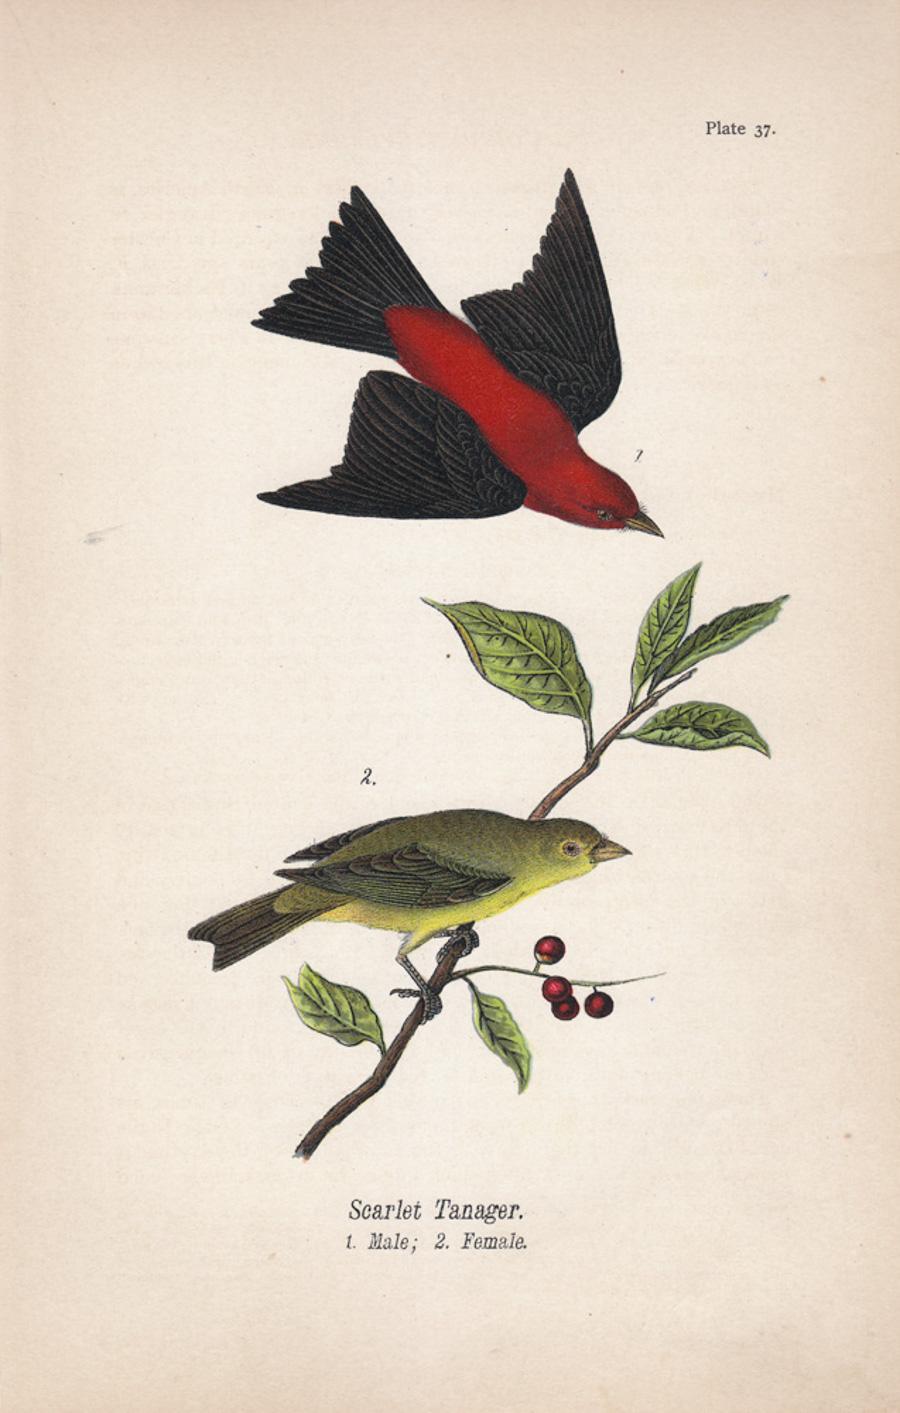 Scarlet tanager; Plate 37